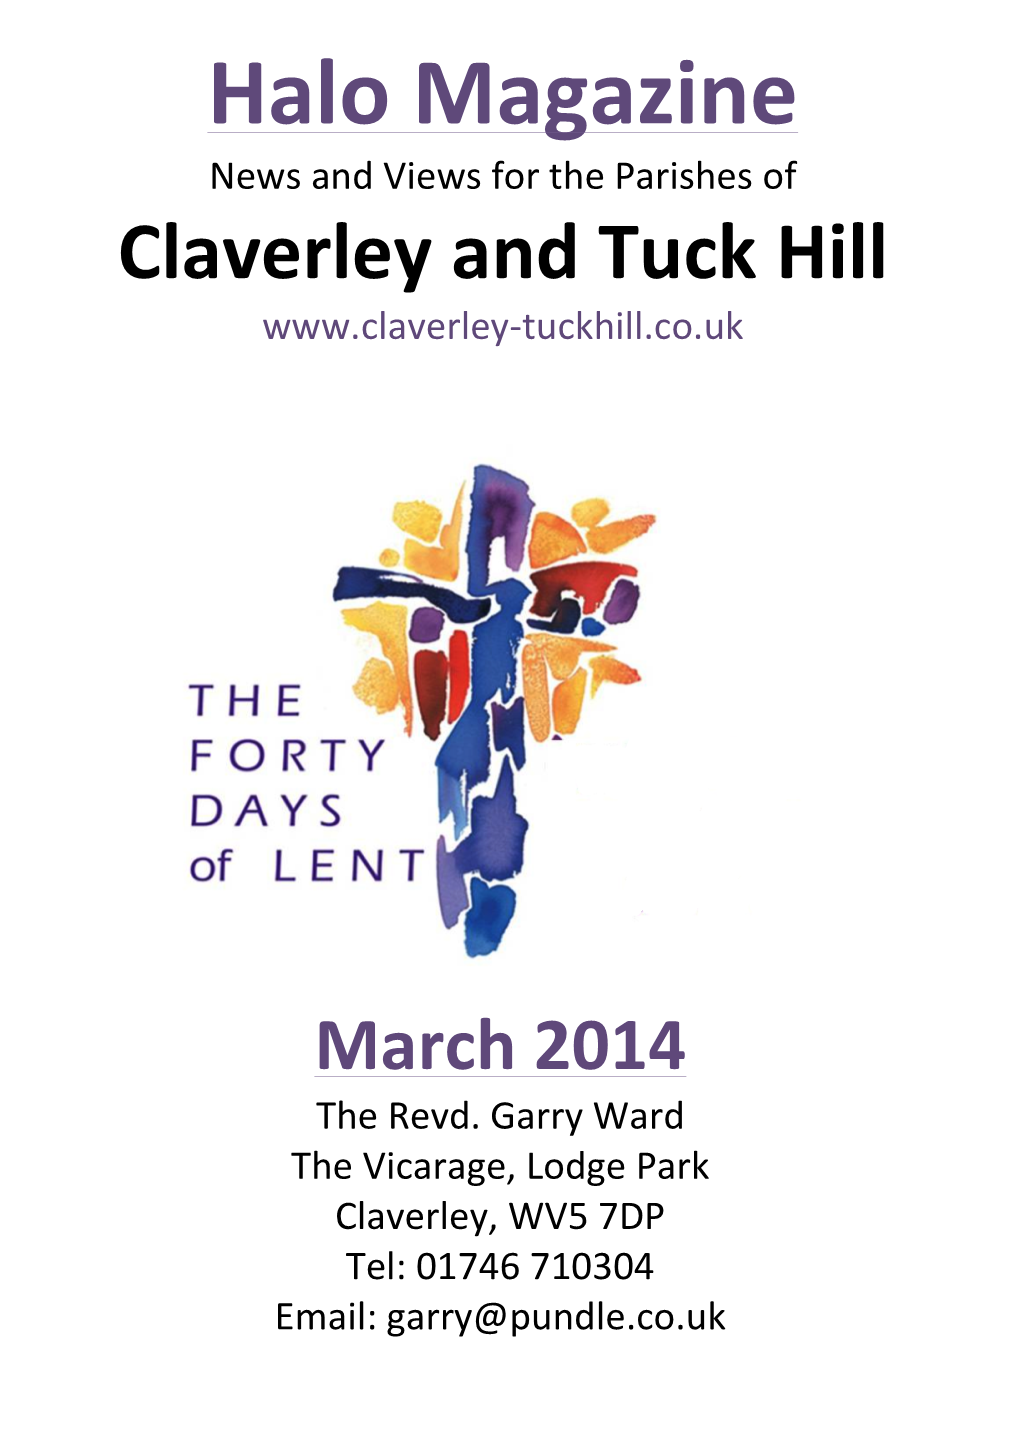 Halo Magazine News and Views for the Parishes of Claverley and Tuck Hill